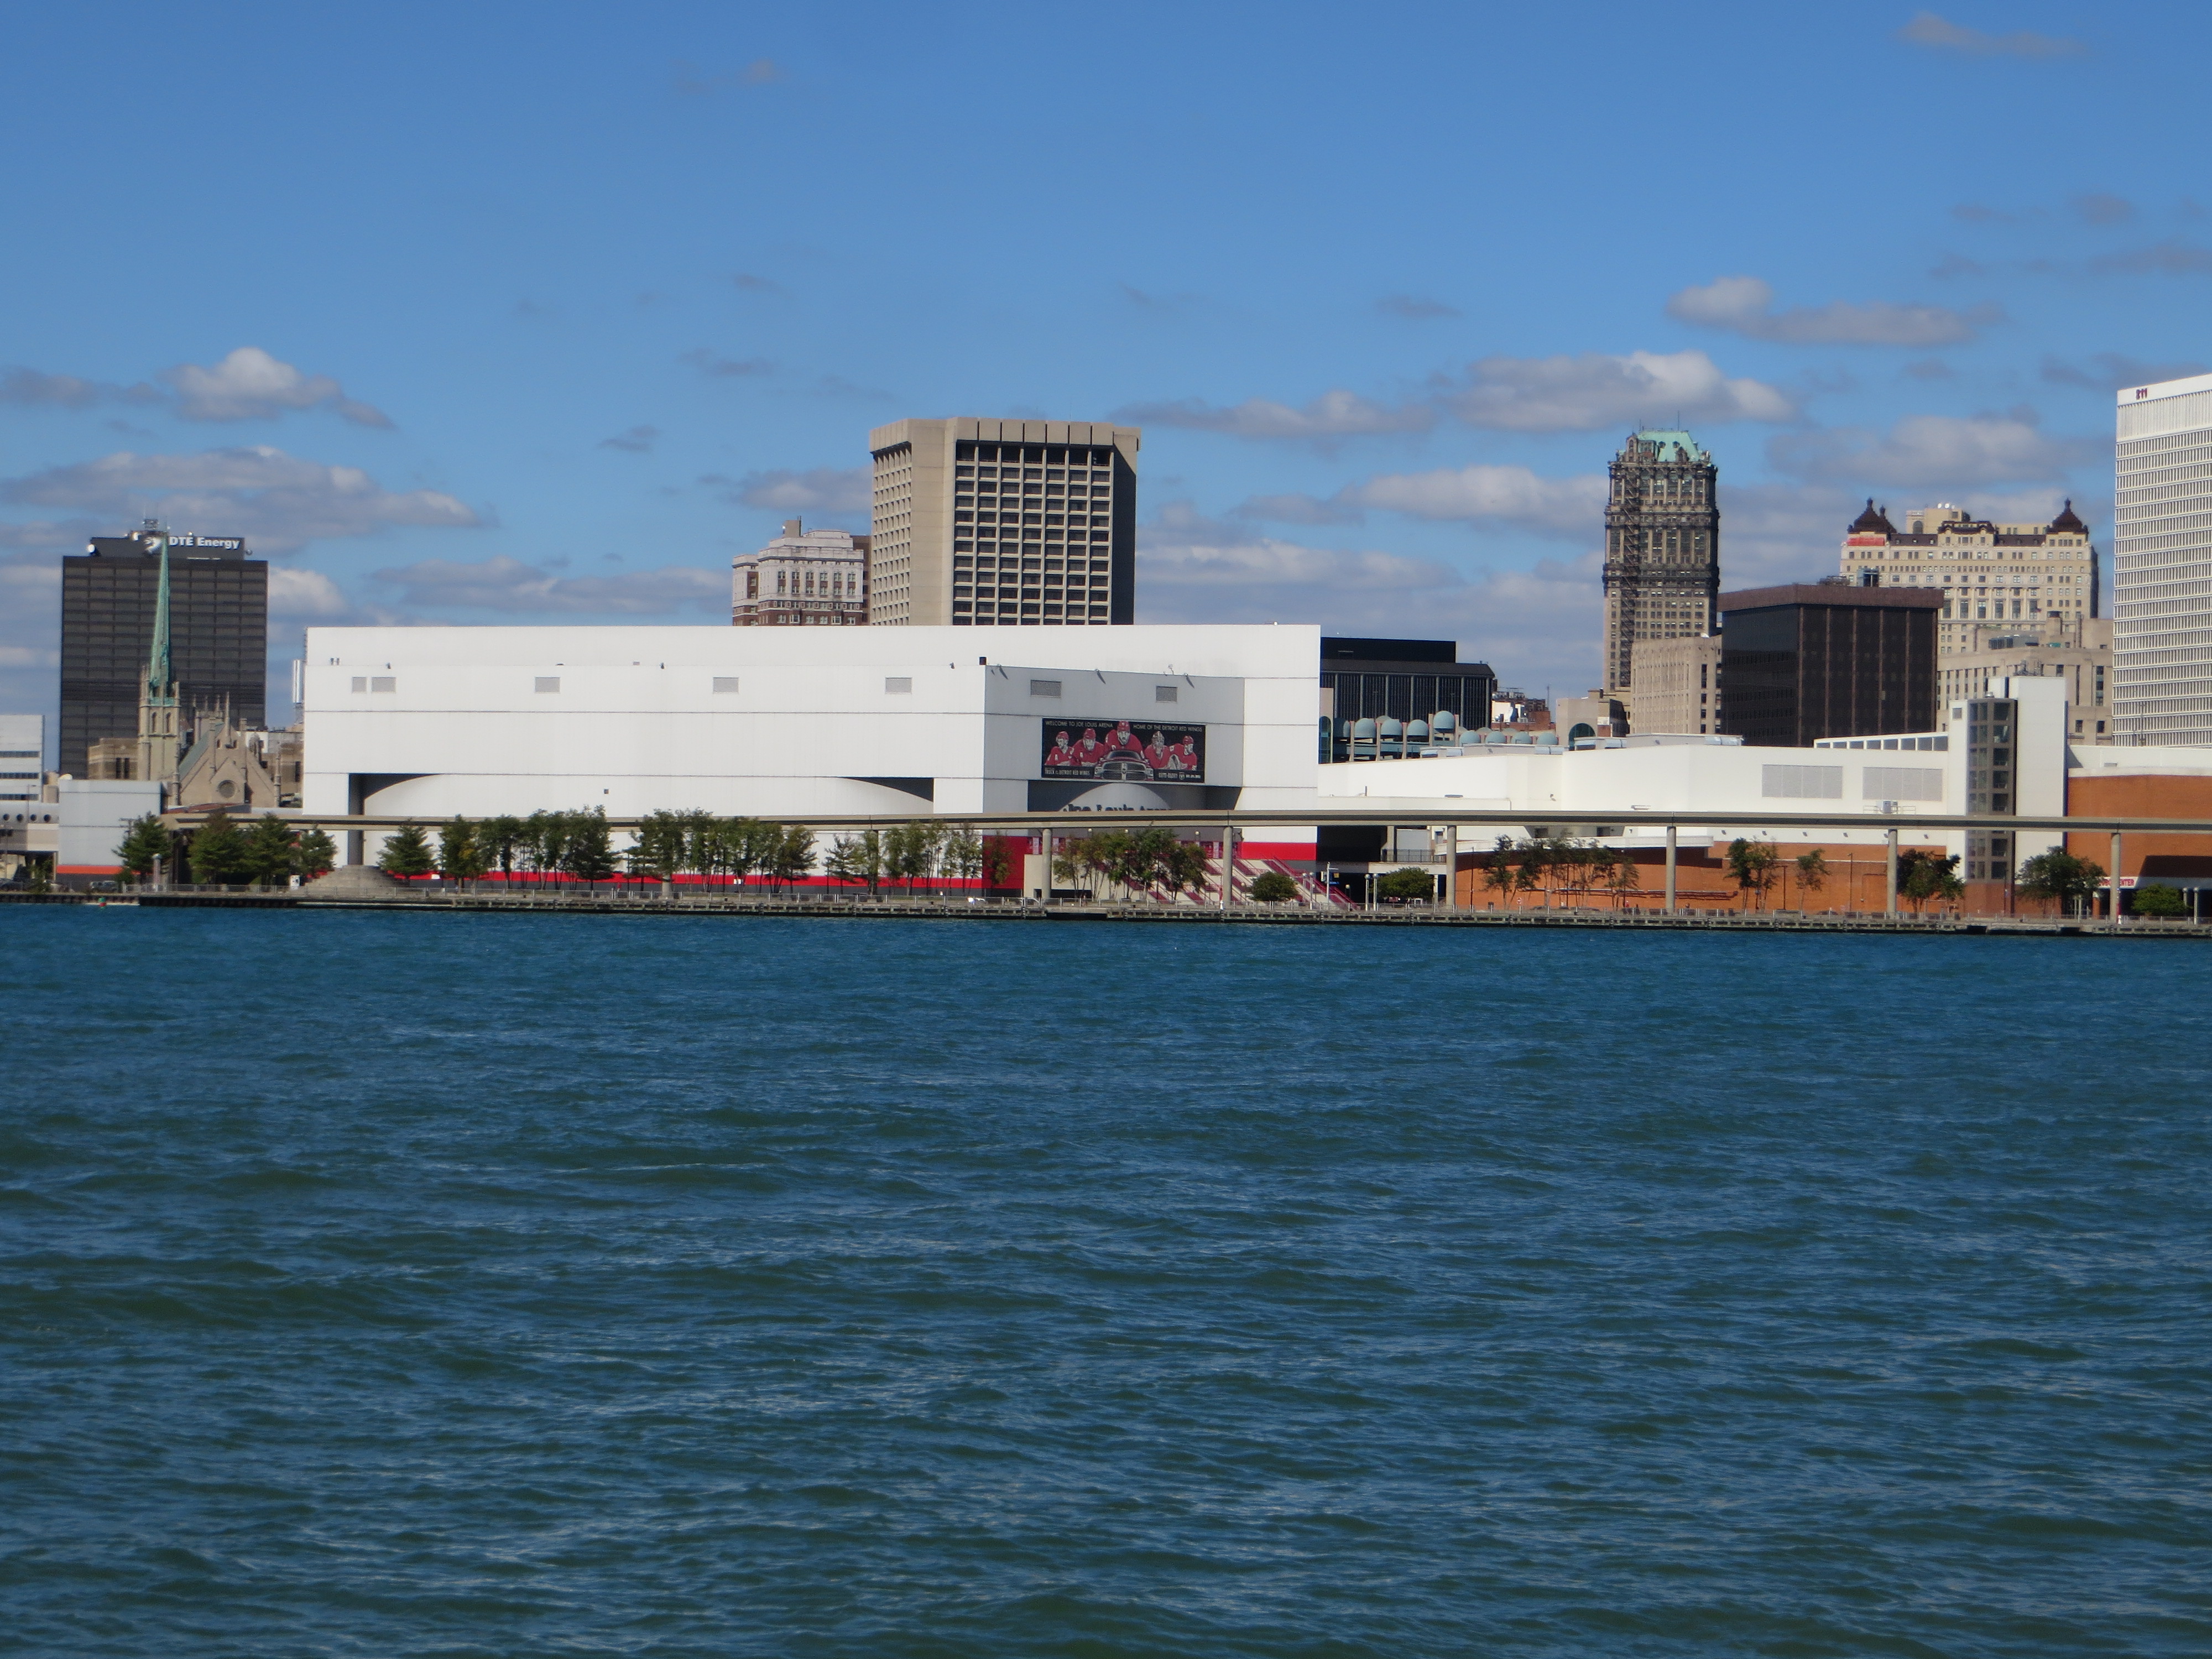 Windsor Arena, first home of the Red Wings, is still standing